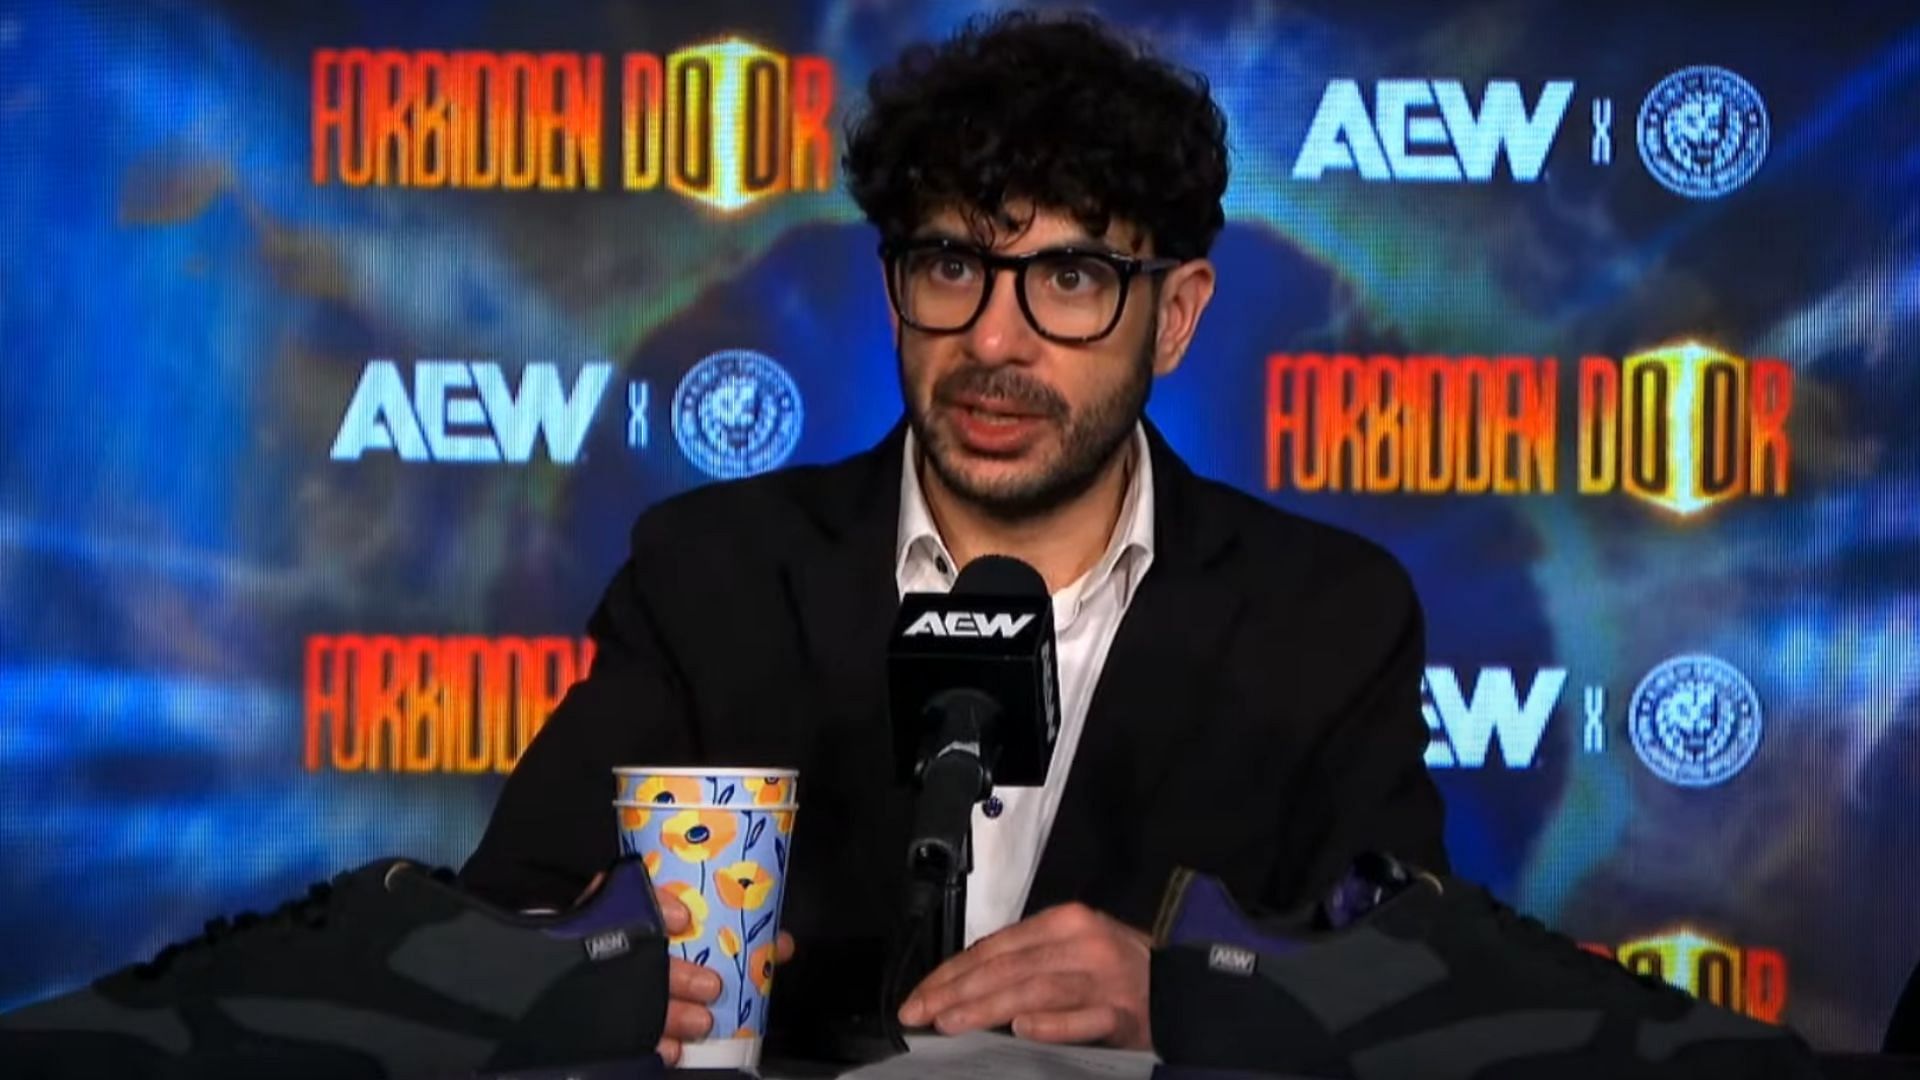 Tony Khan has made a major announcement. (Image credits: AEW YouTube)